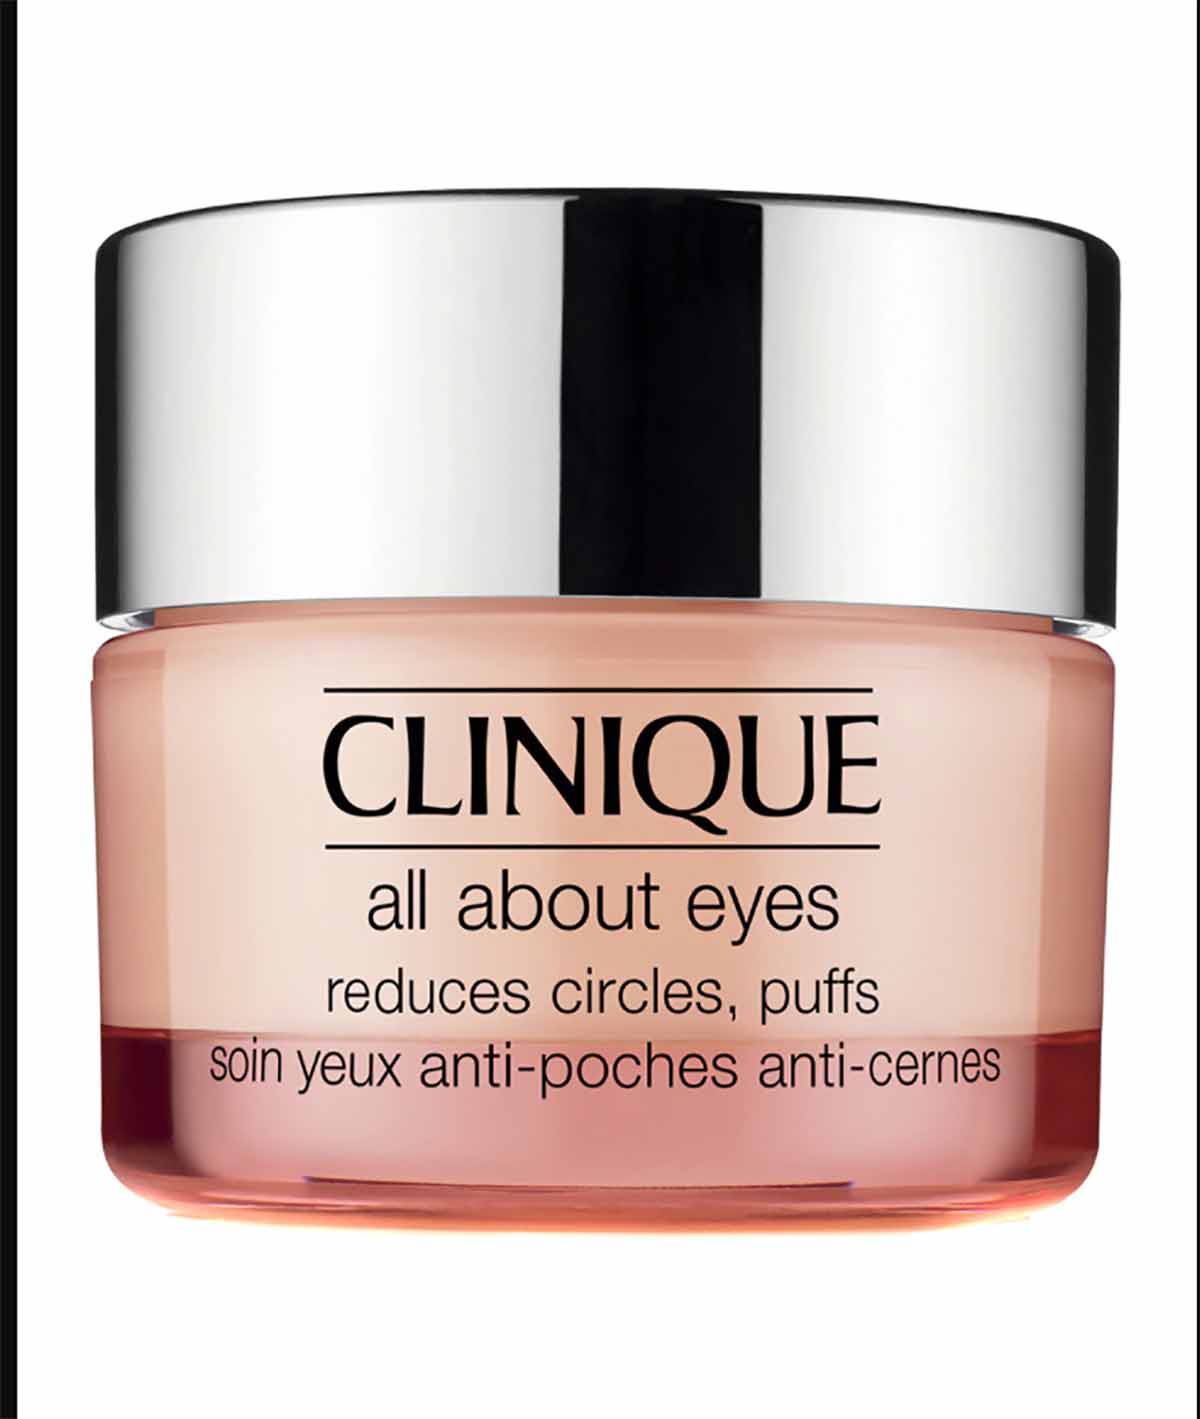 All About Eyes Clinique 41 euros